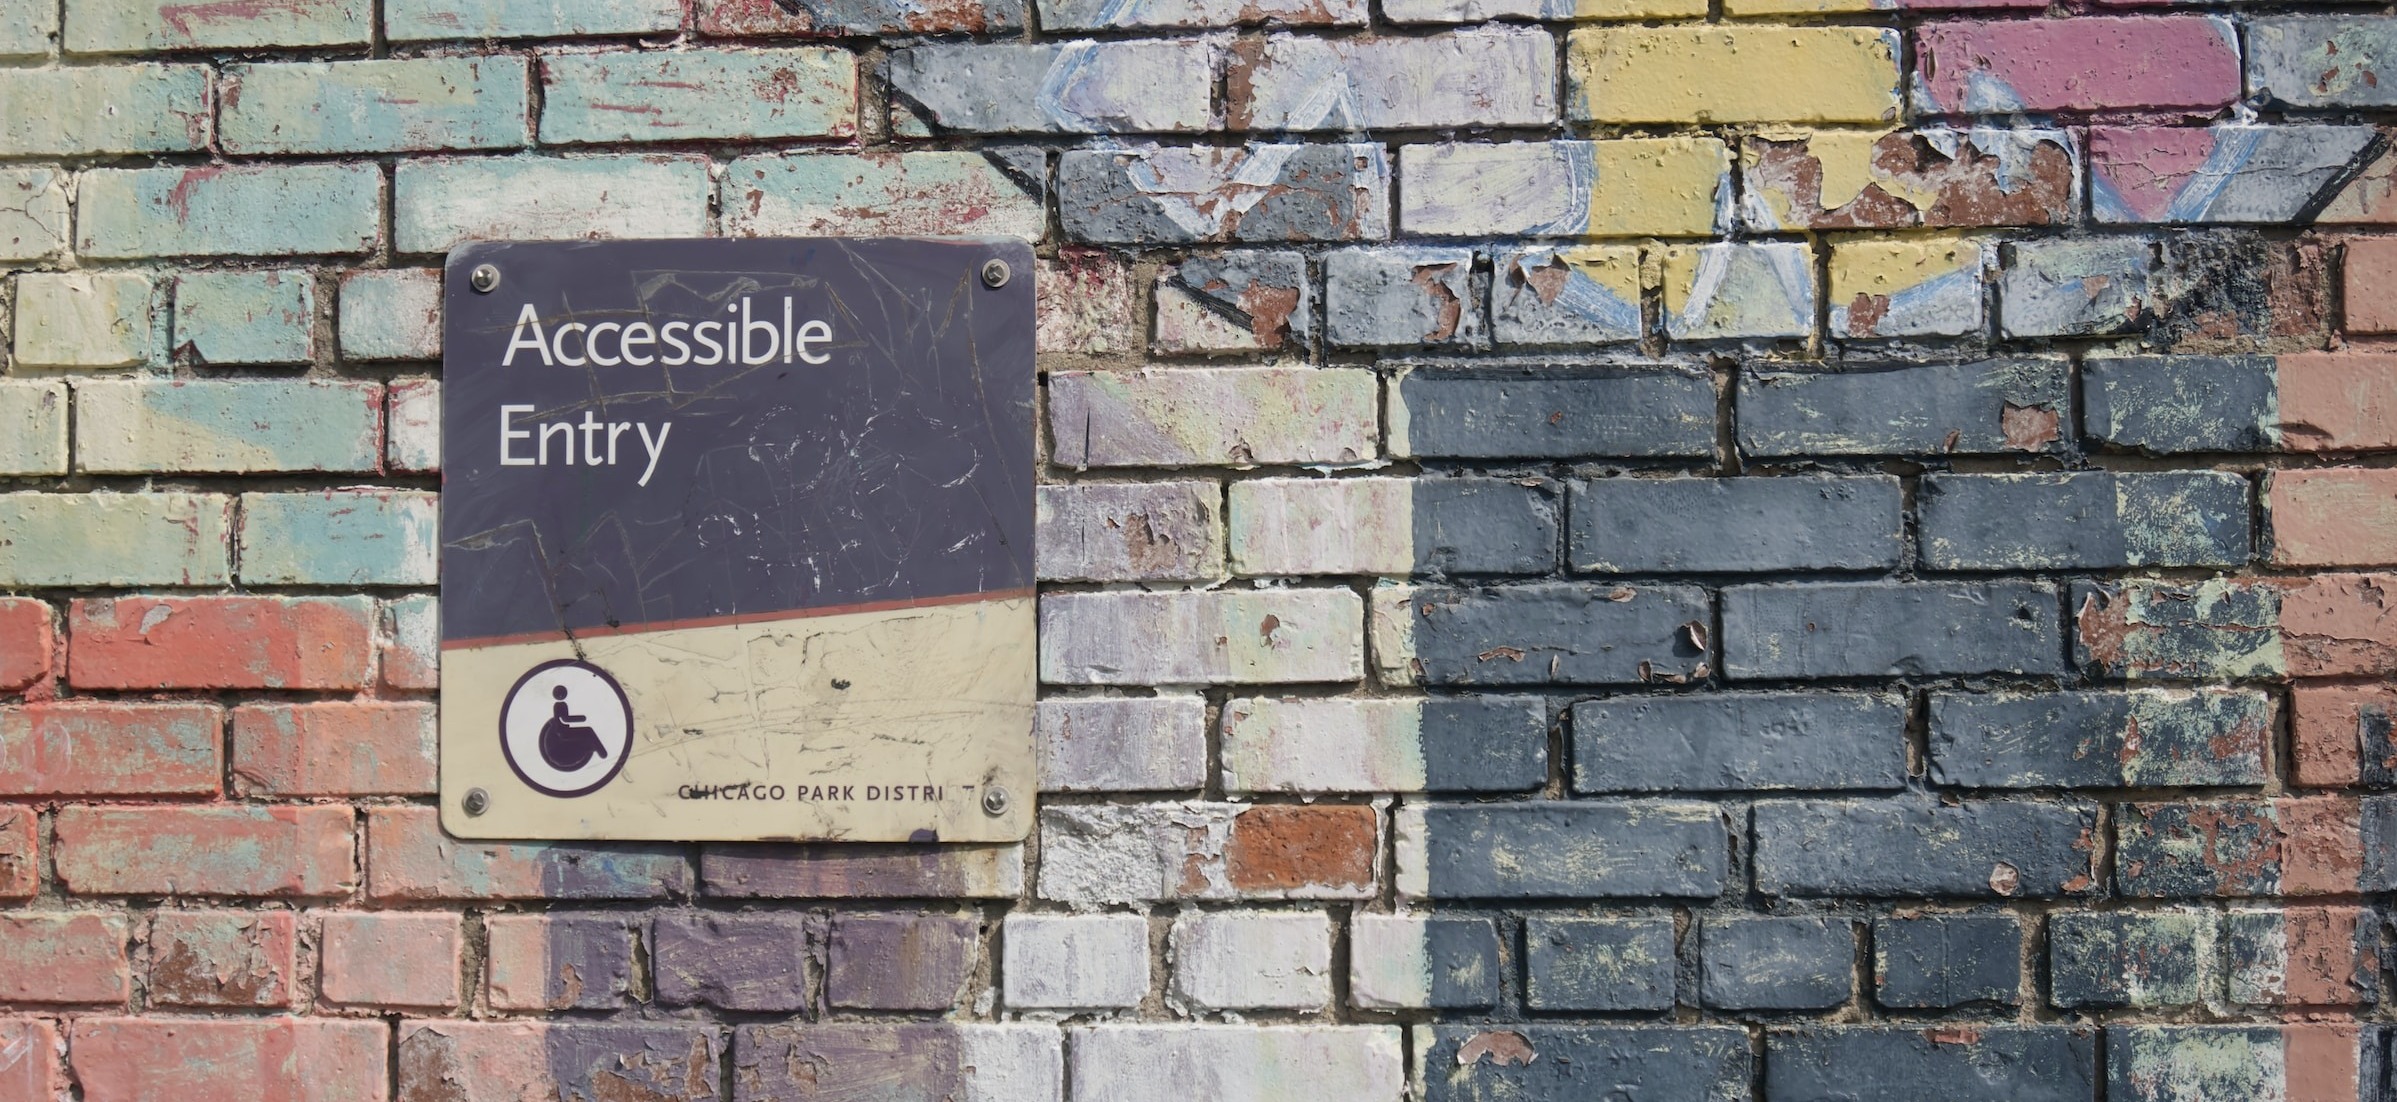 An "Accessibile Entry" sign on a multi-colored brick wall